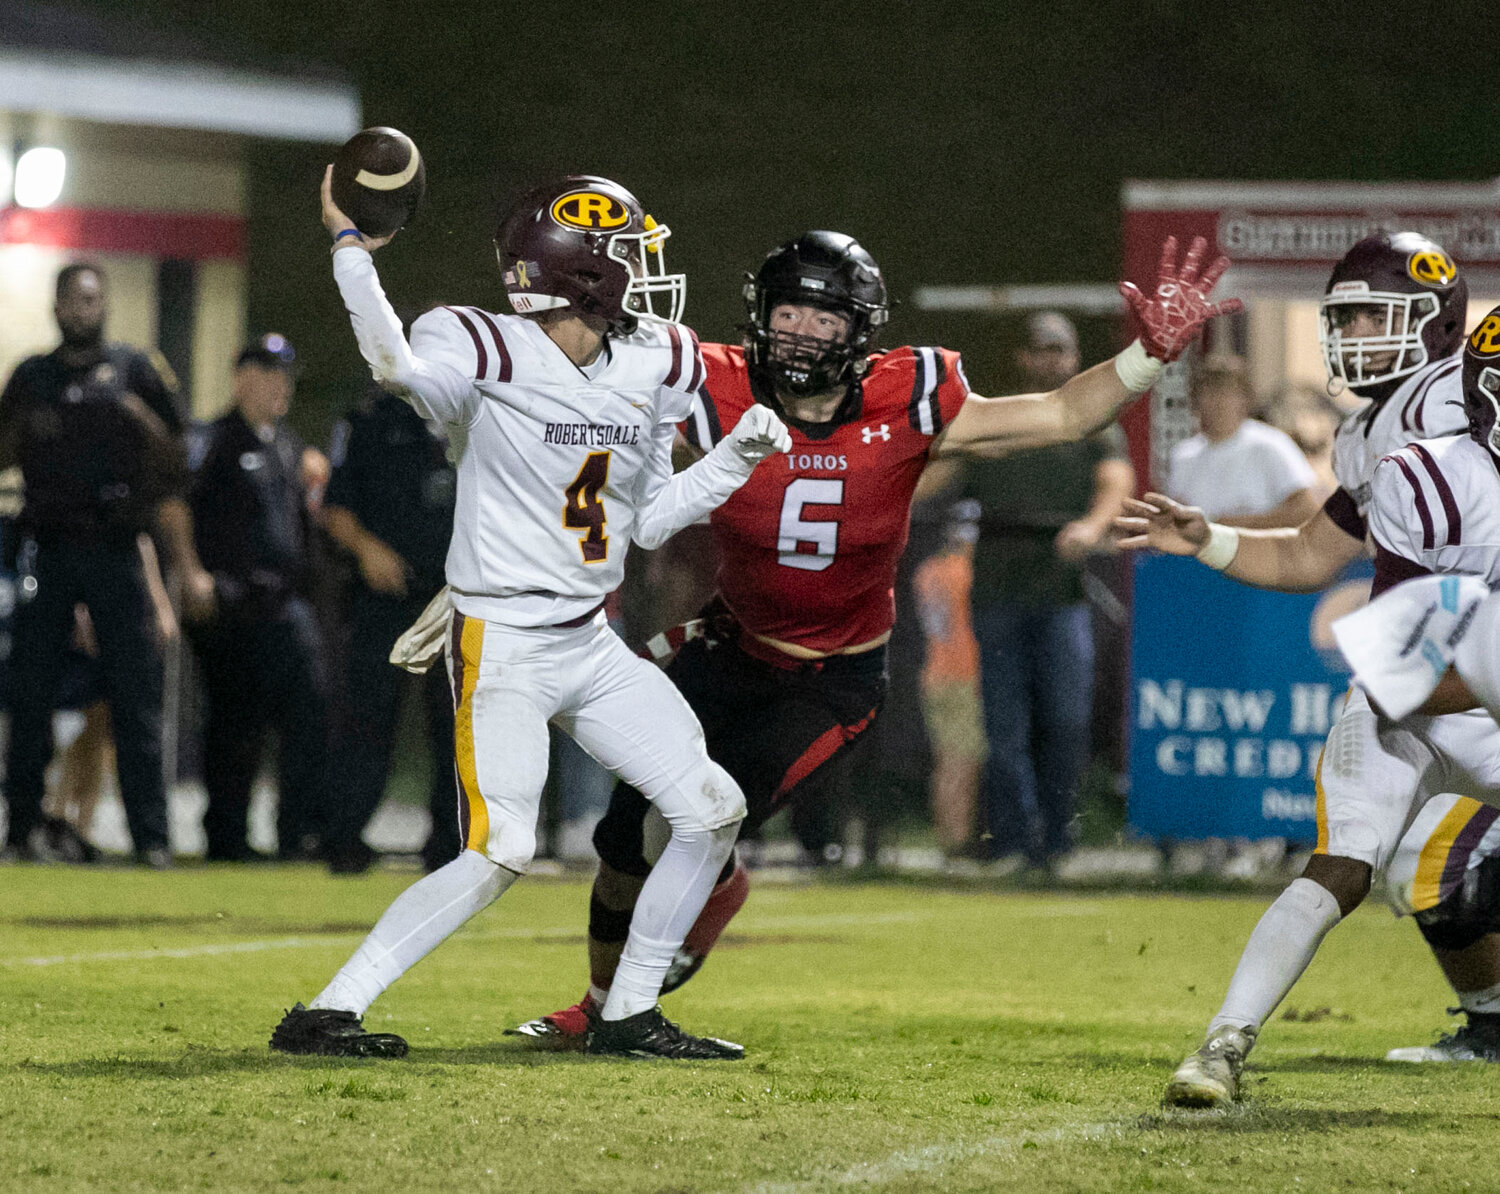 Toro senior defensive end Cole McConathy brings pressure off the end during the third quarter of Spanish Fort’s 45-0 win over the Robertsdale Golden Bears. The Louisville commit entered the game as the state’s sack leader with 15 through eight games for 73 total lost yards.